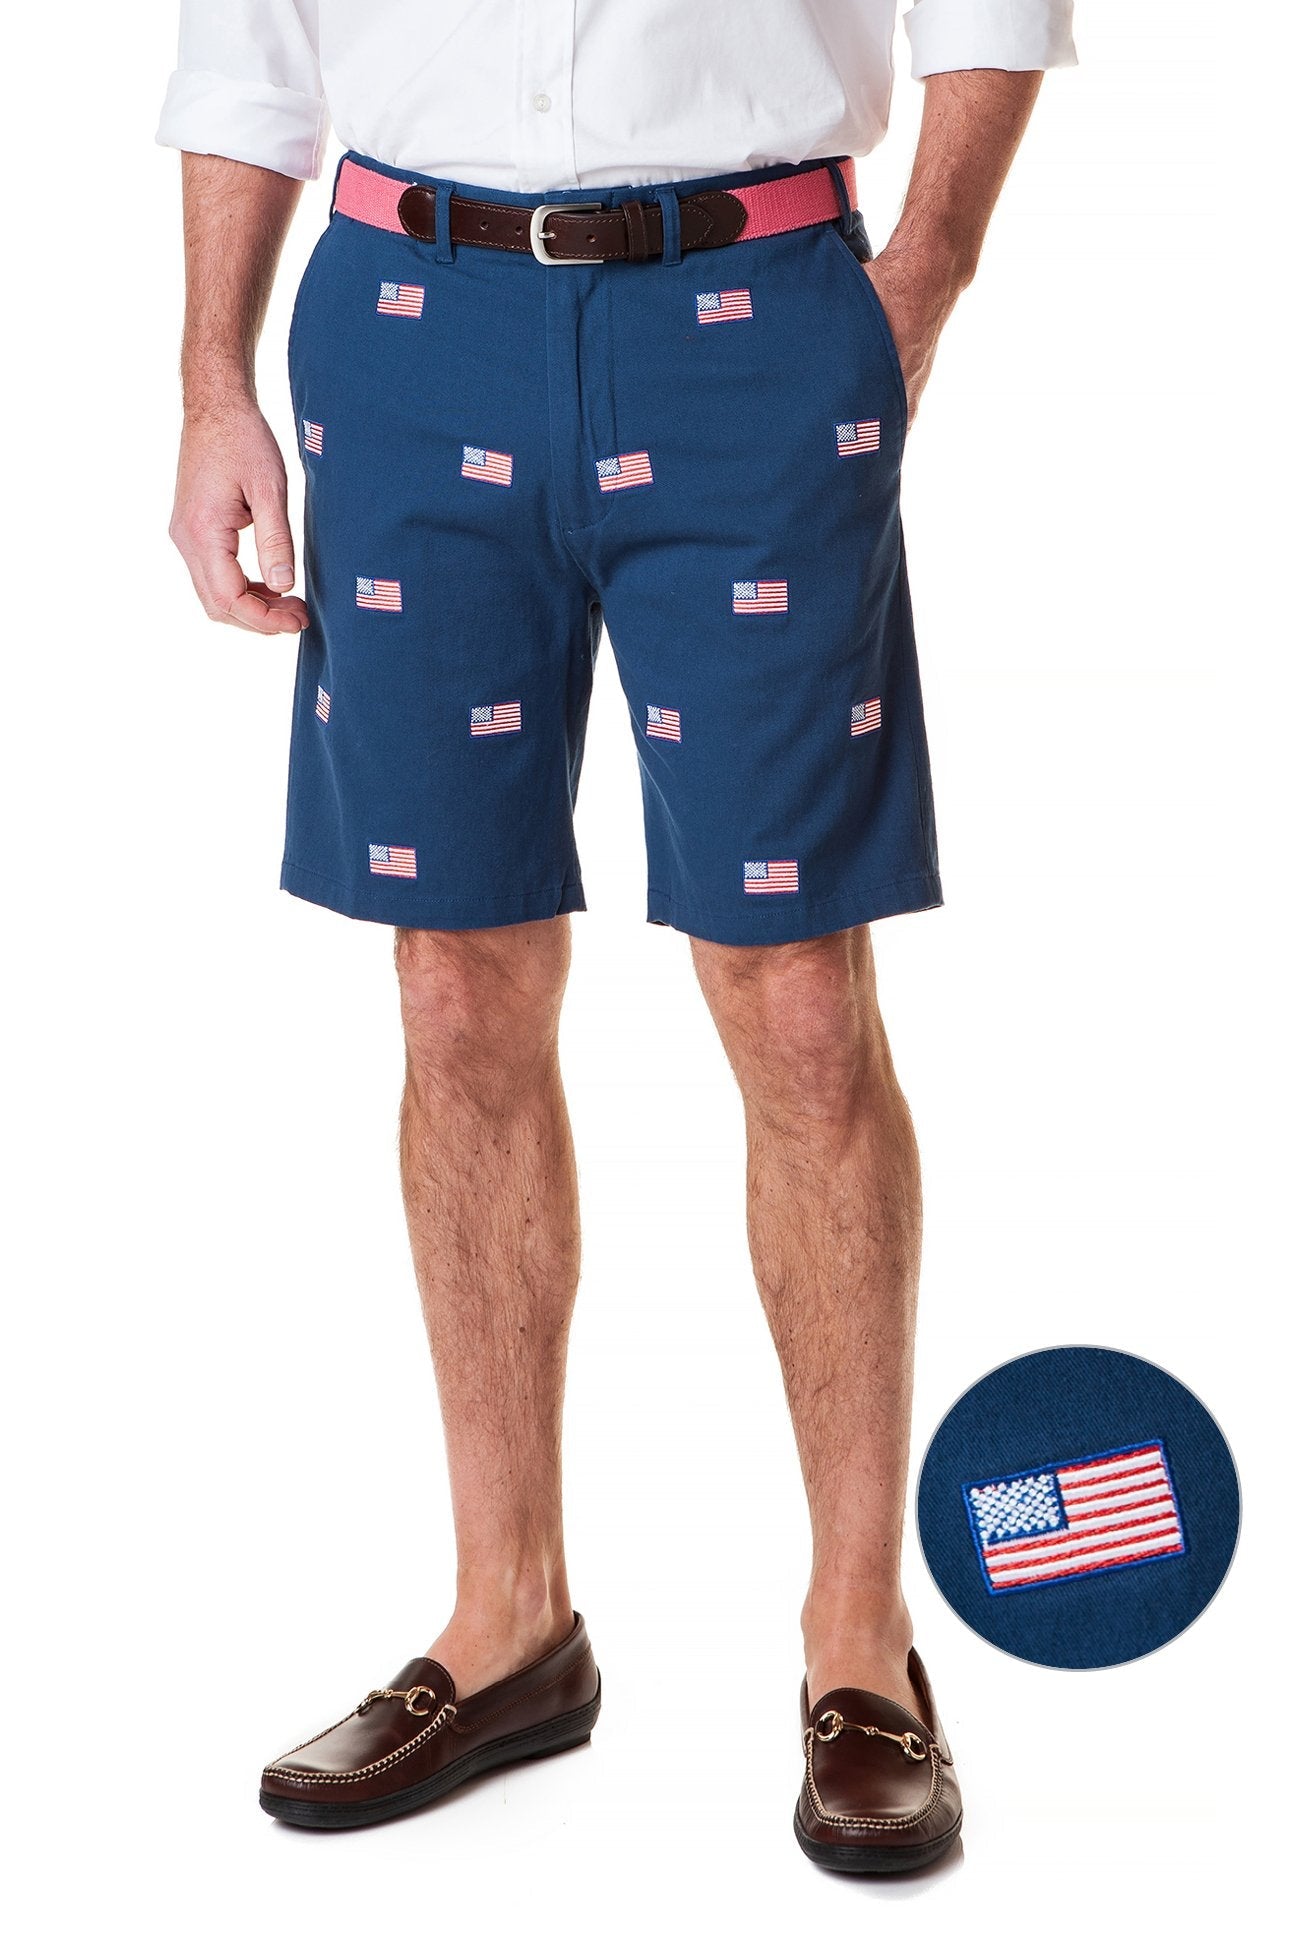 Cisco Short Stretch Twill Nantucket Navy With American Flag